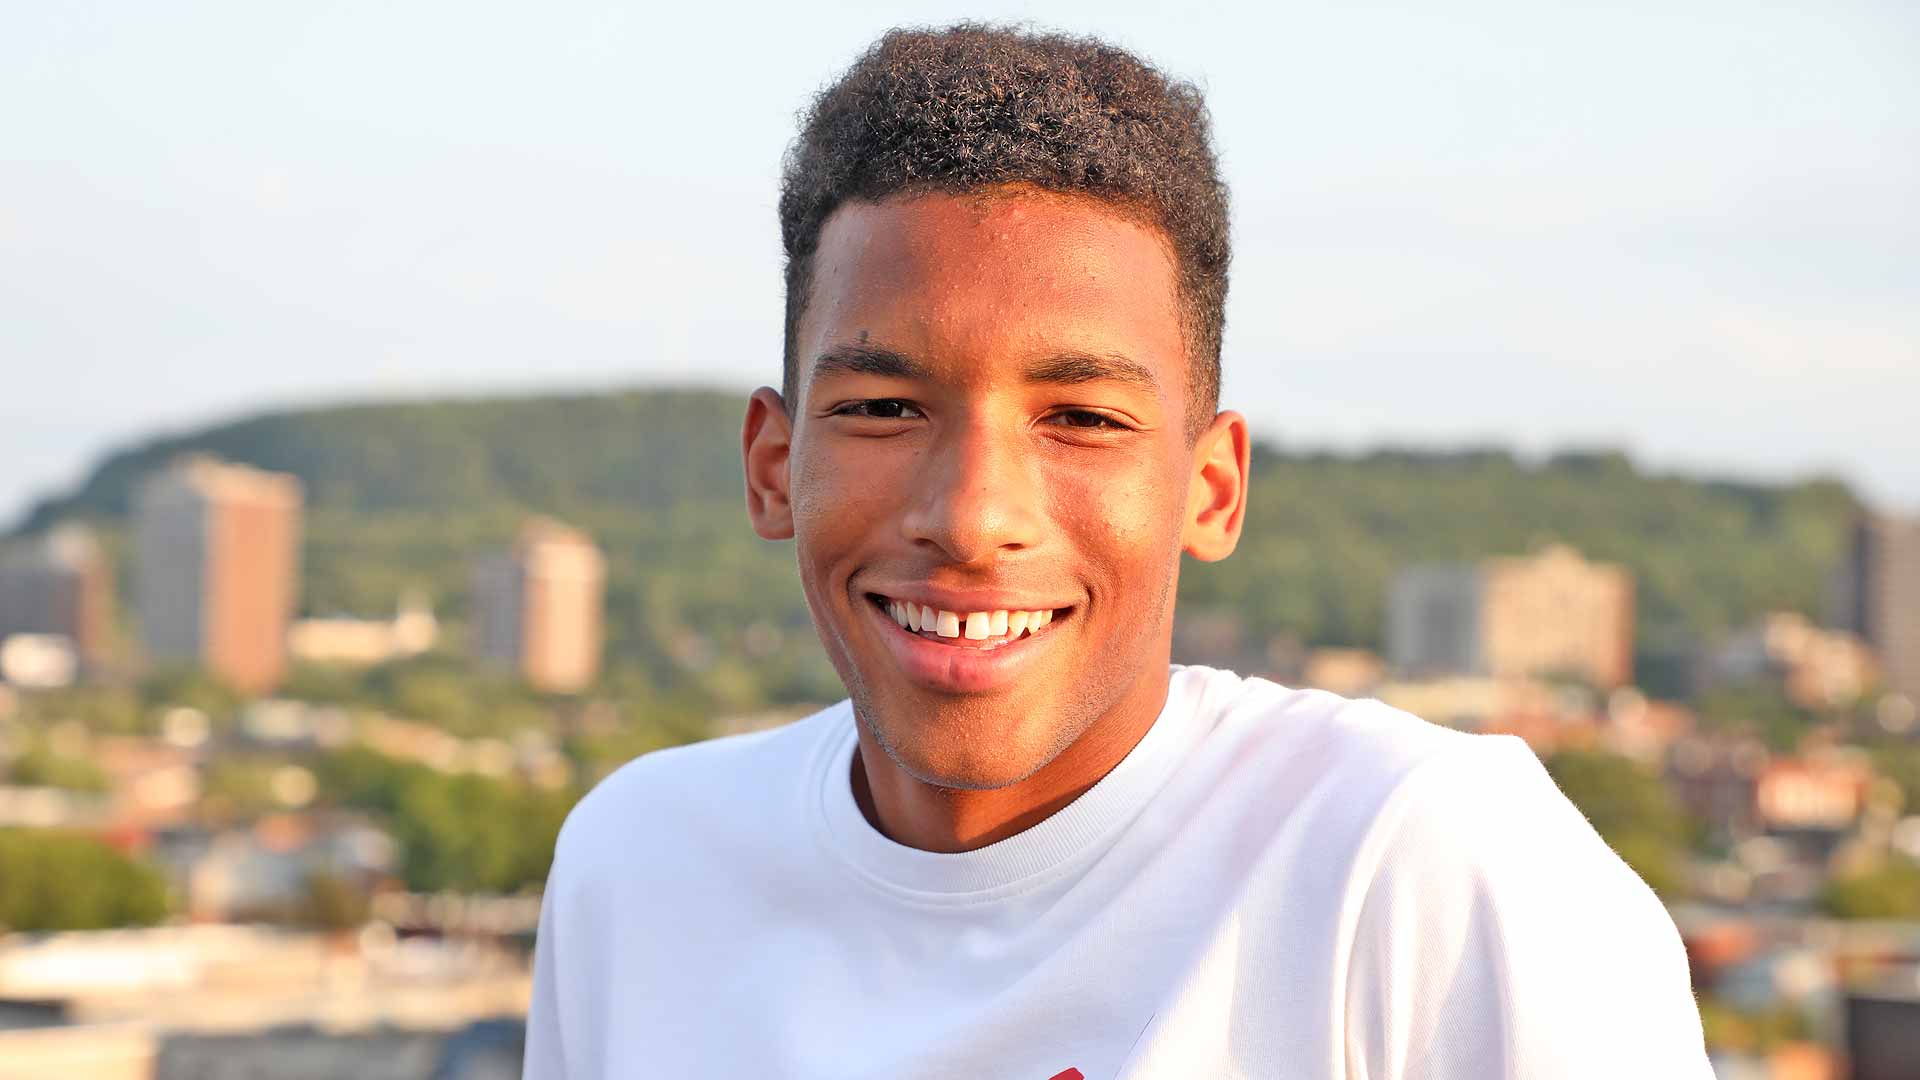 <a href='https://www.atptour.com/en/players/felix-auger-aliassime/ag37/overview'>Felix Auger-Aliassime</a> ahead of the 2019 <a href='https://www.atptour.com/en/tournaments/montreal/421/overview'>Coupe Rogers</a> in Montreal